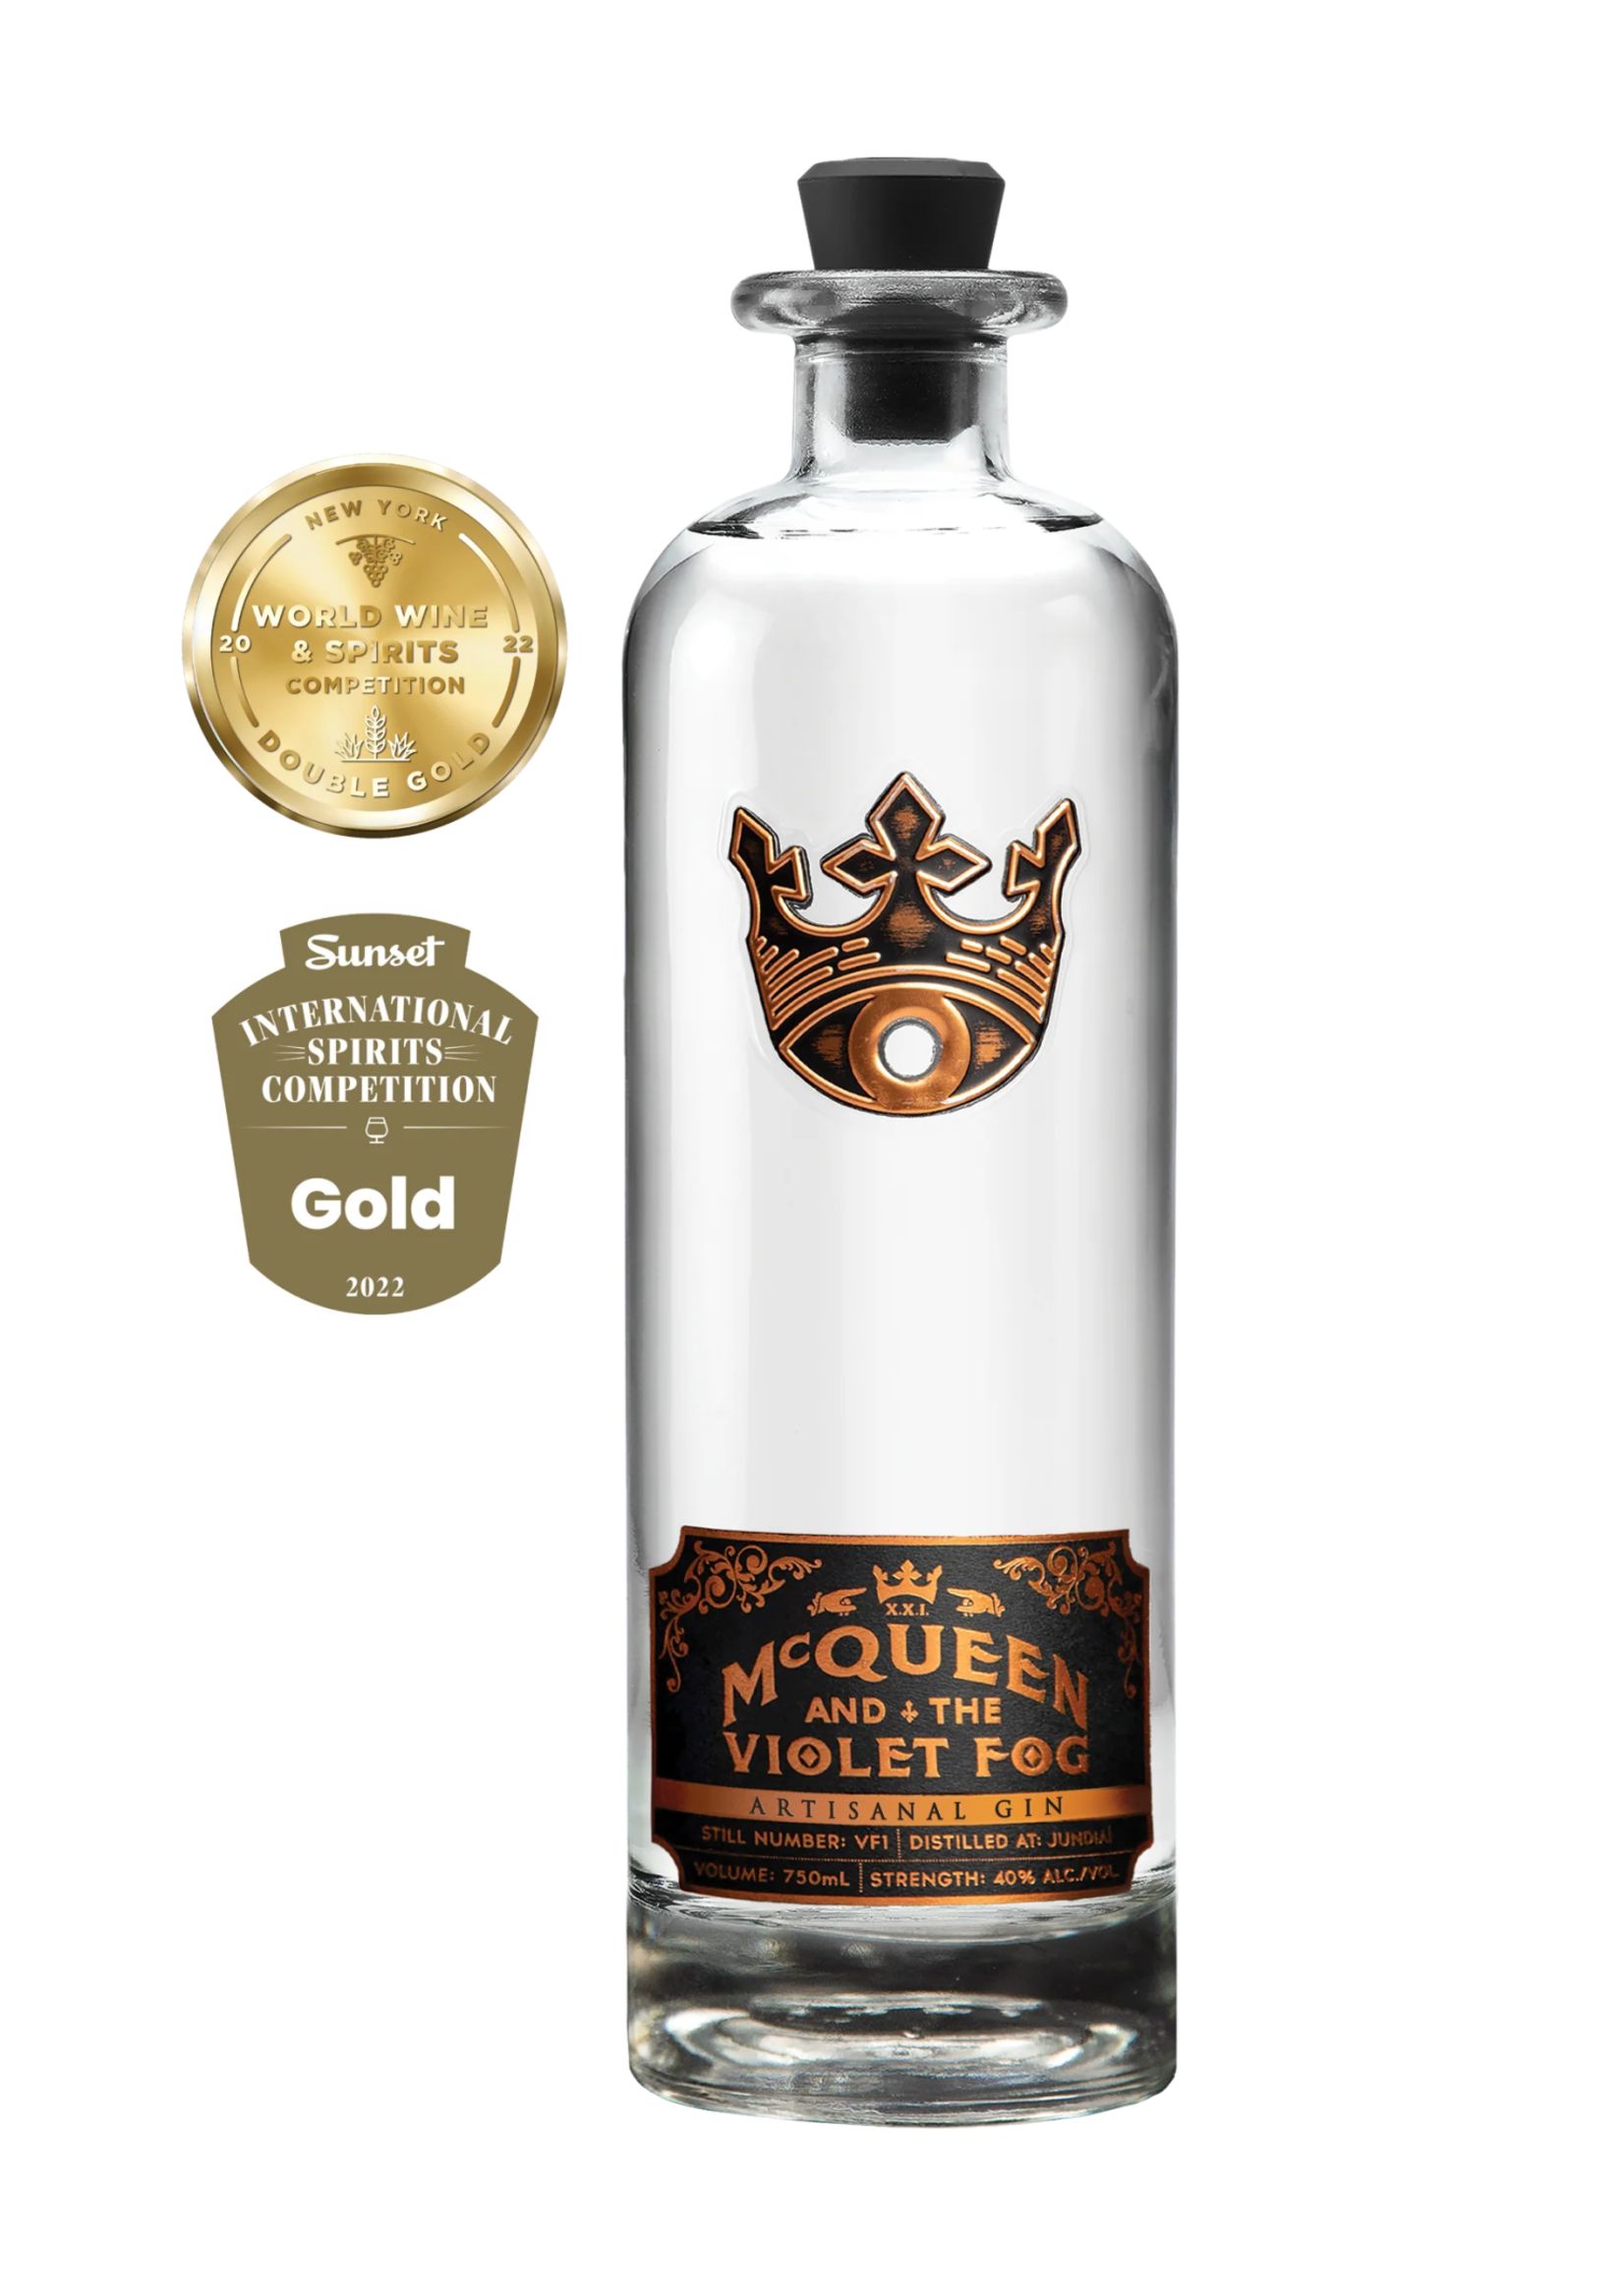 McQueen & The Violet Fog Gin 80Proof 750ml